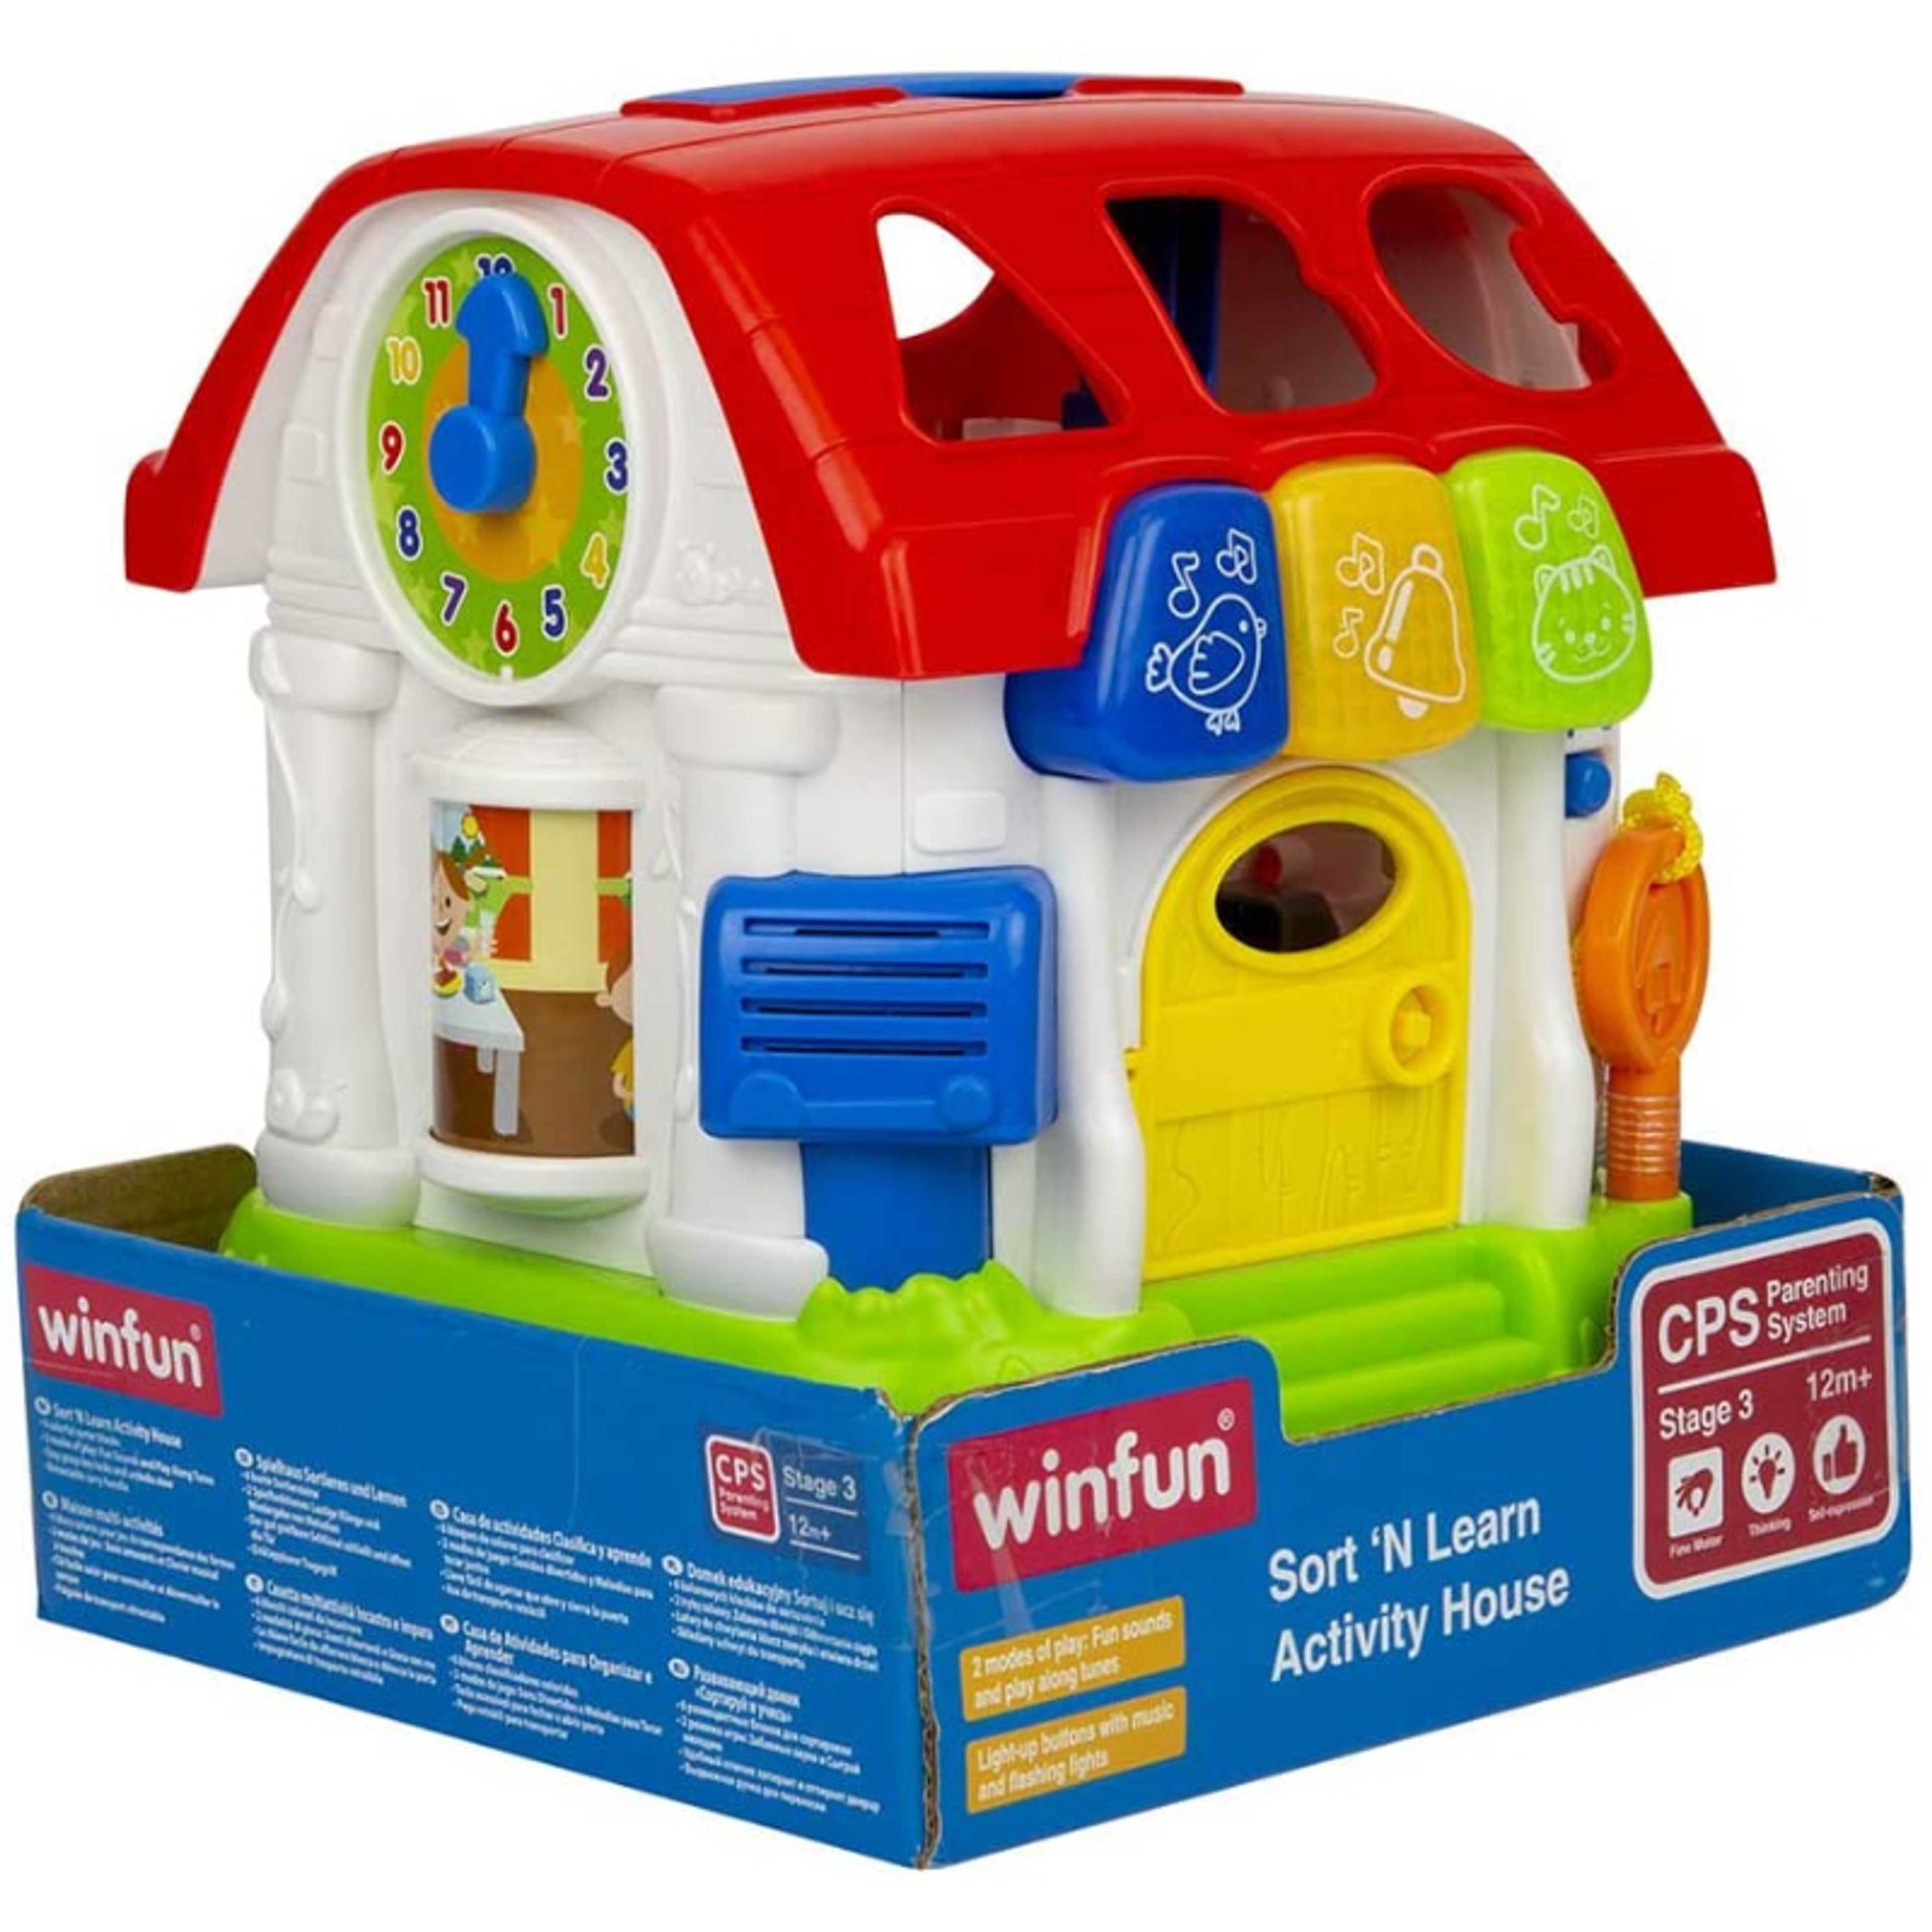 Sort And Learn Activity House Game For Unisex